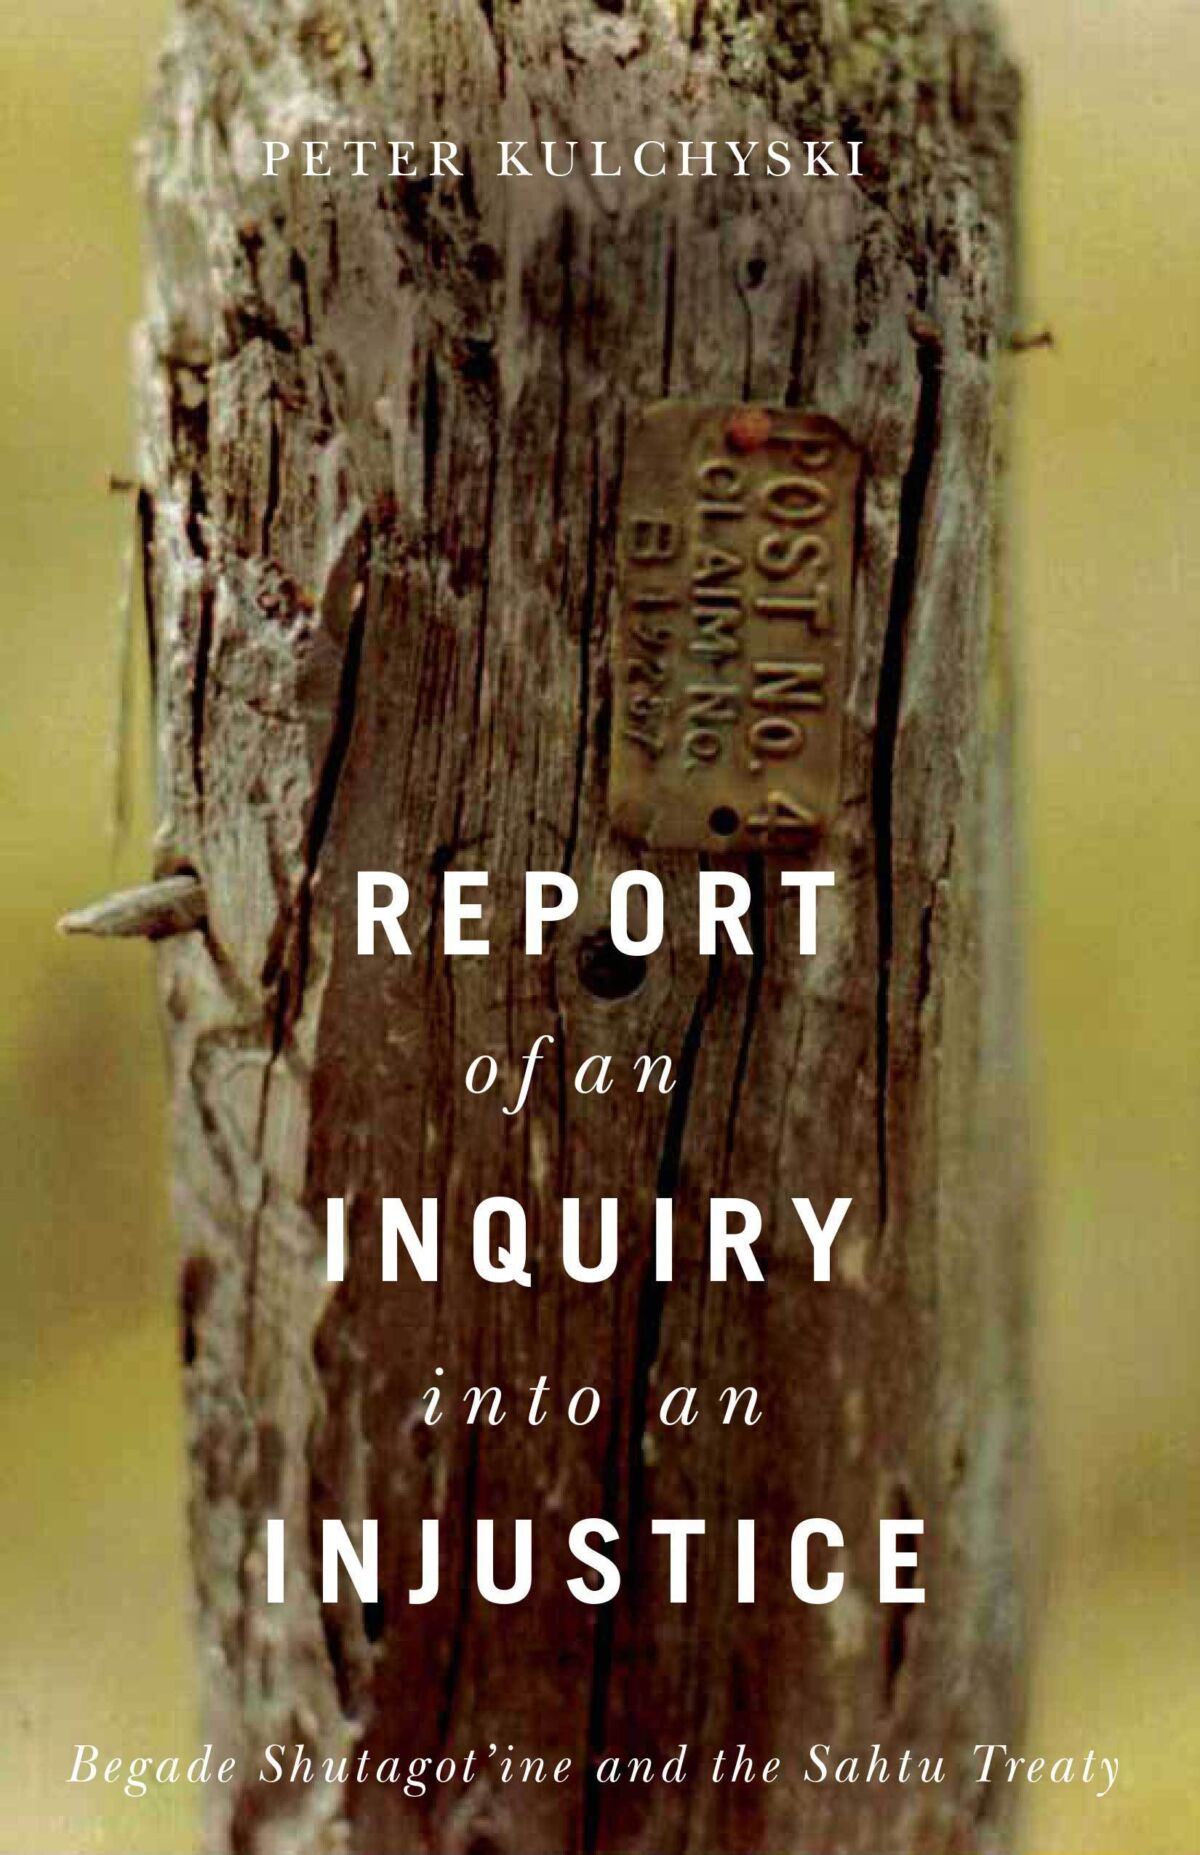 Report of an Inquiry into an Injustice – University of Manitoba Press